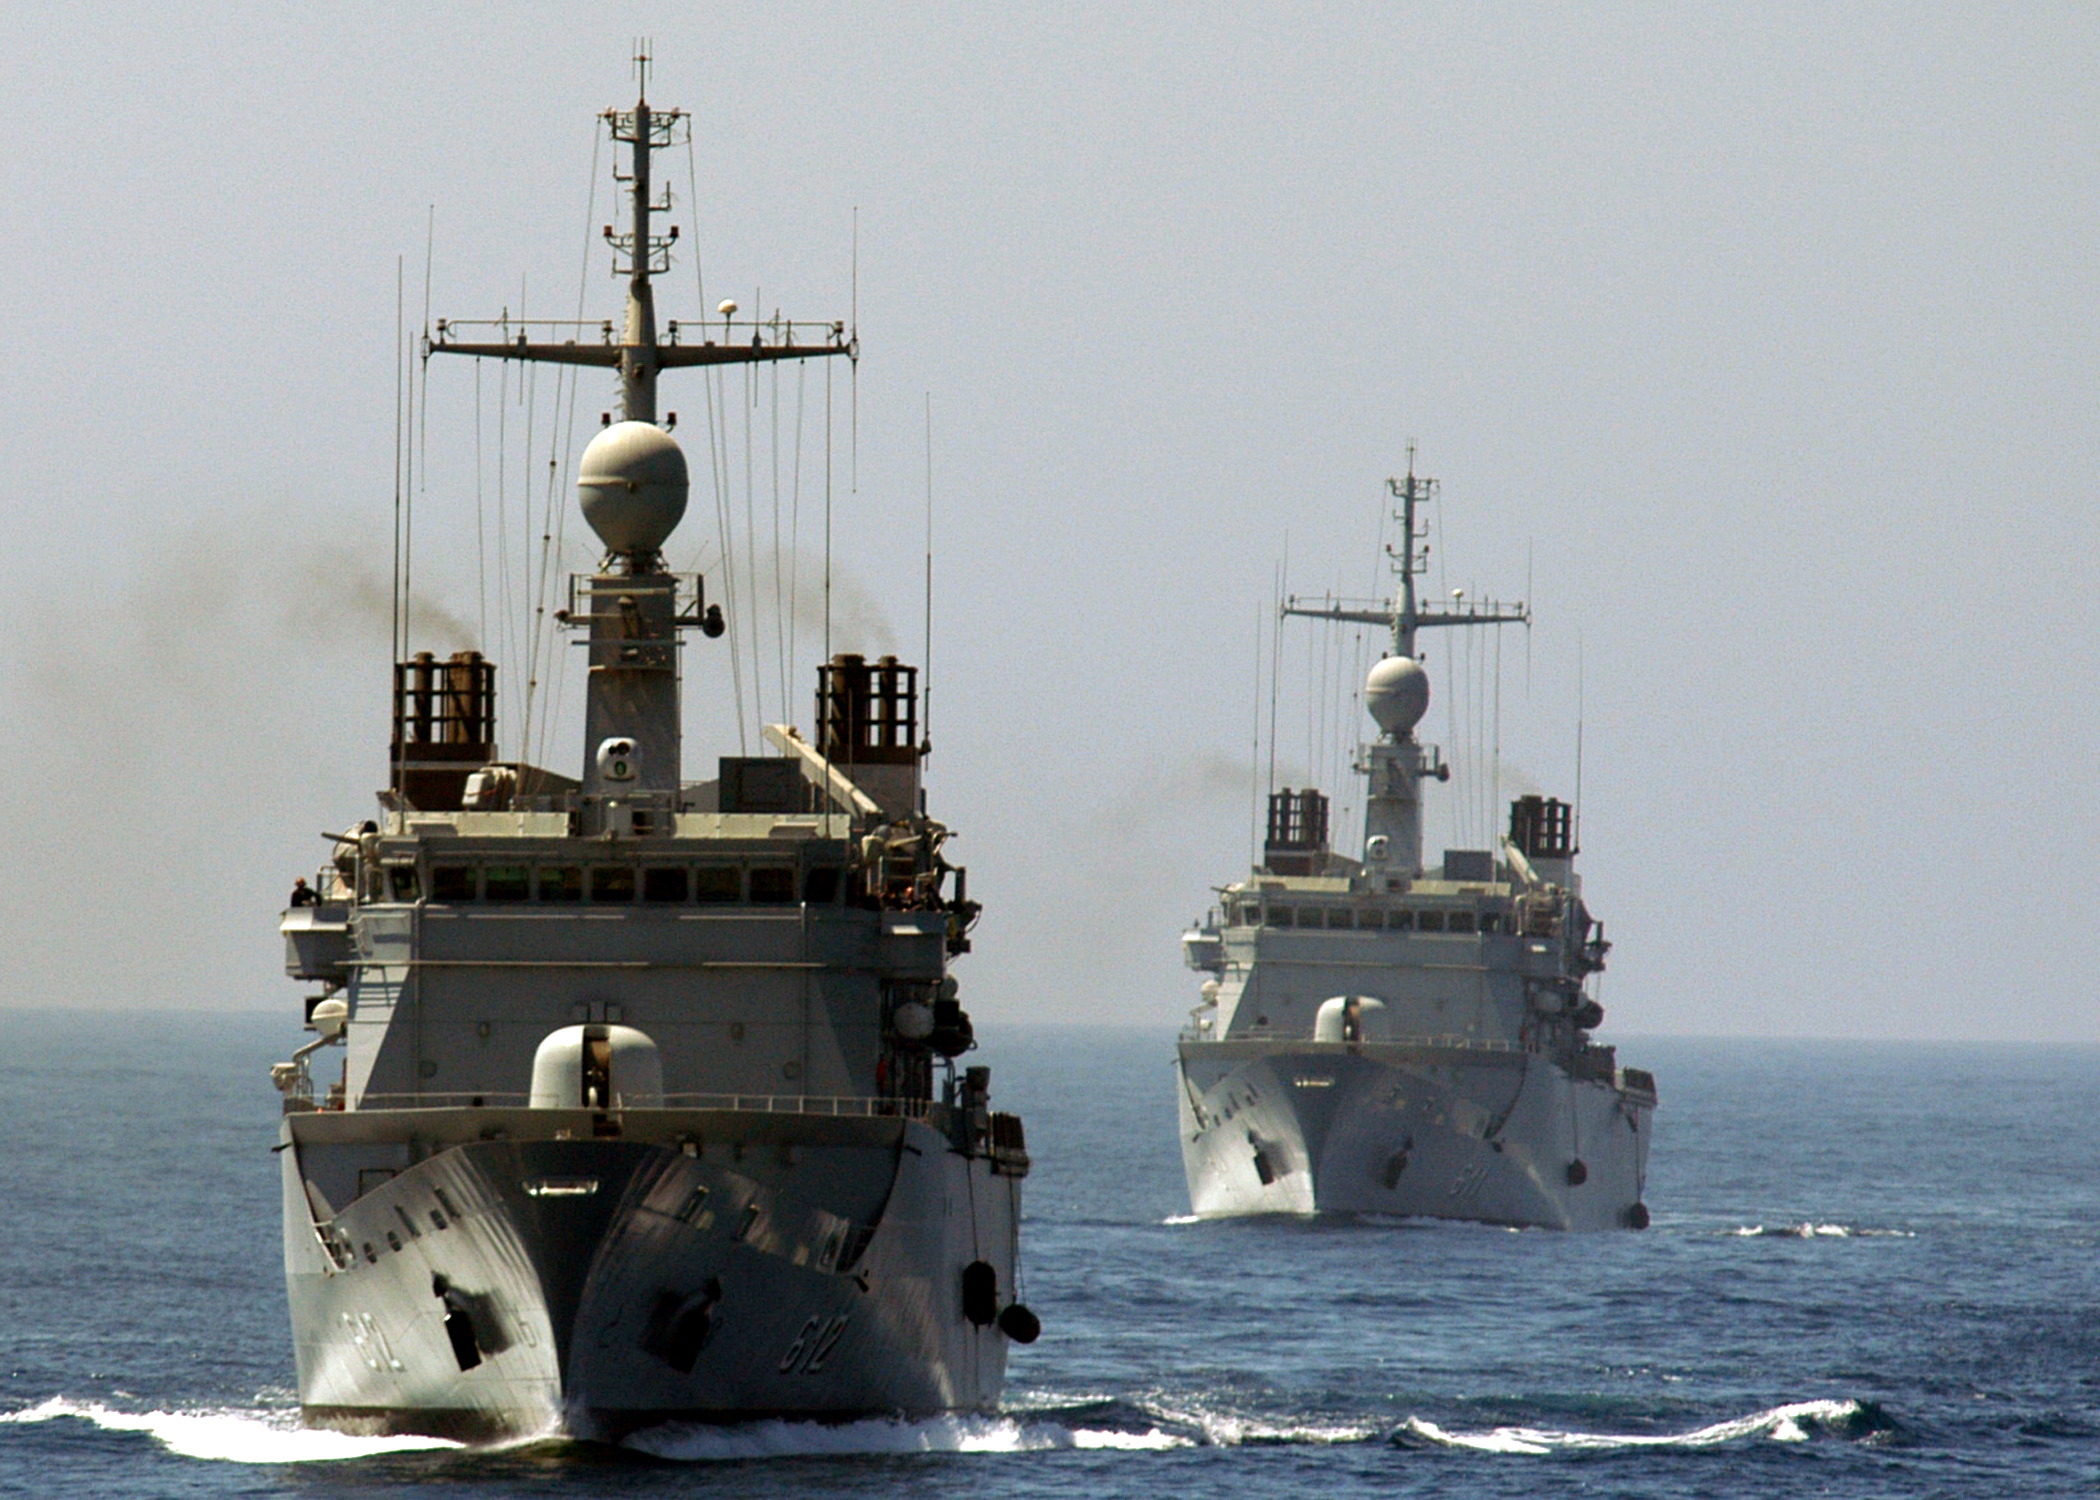 US_Navy_050405-N-3557N-112_The_Moroccan_Navy_Floreal-class_frigates%2C_Muhammed_V_%28FFGHM_611%29_and_Hassan_II_%28FFGHM_612%29_conduct_maneuvers_with_the_ships_assigned_to_the_USS_Kearsarge_%28LHD_3%29_Expeditionary_Strike_Group.jpg